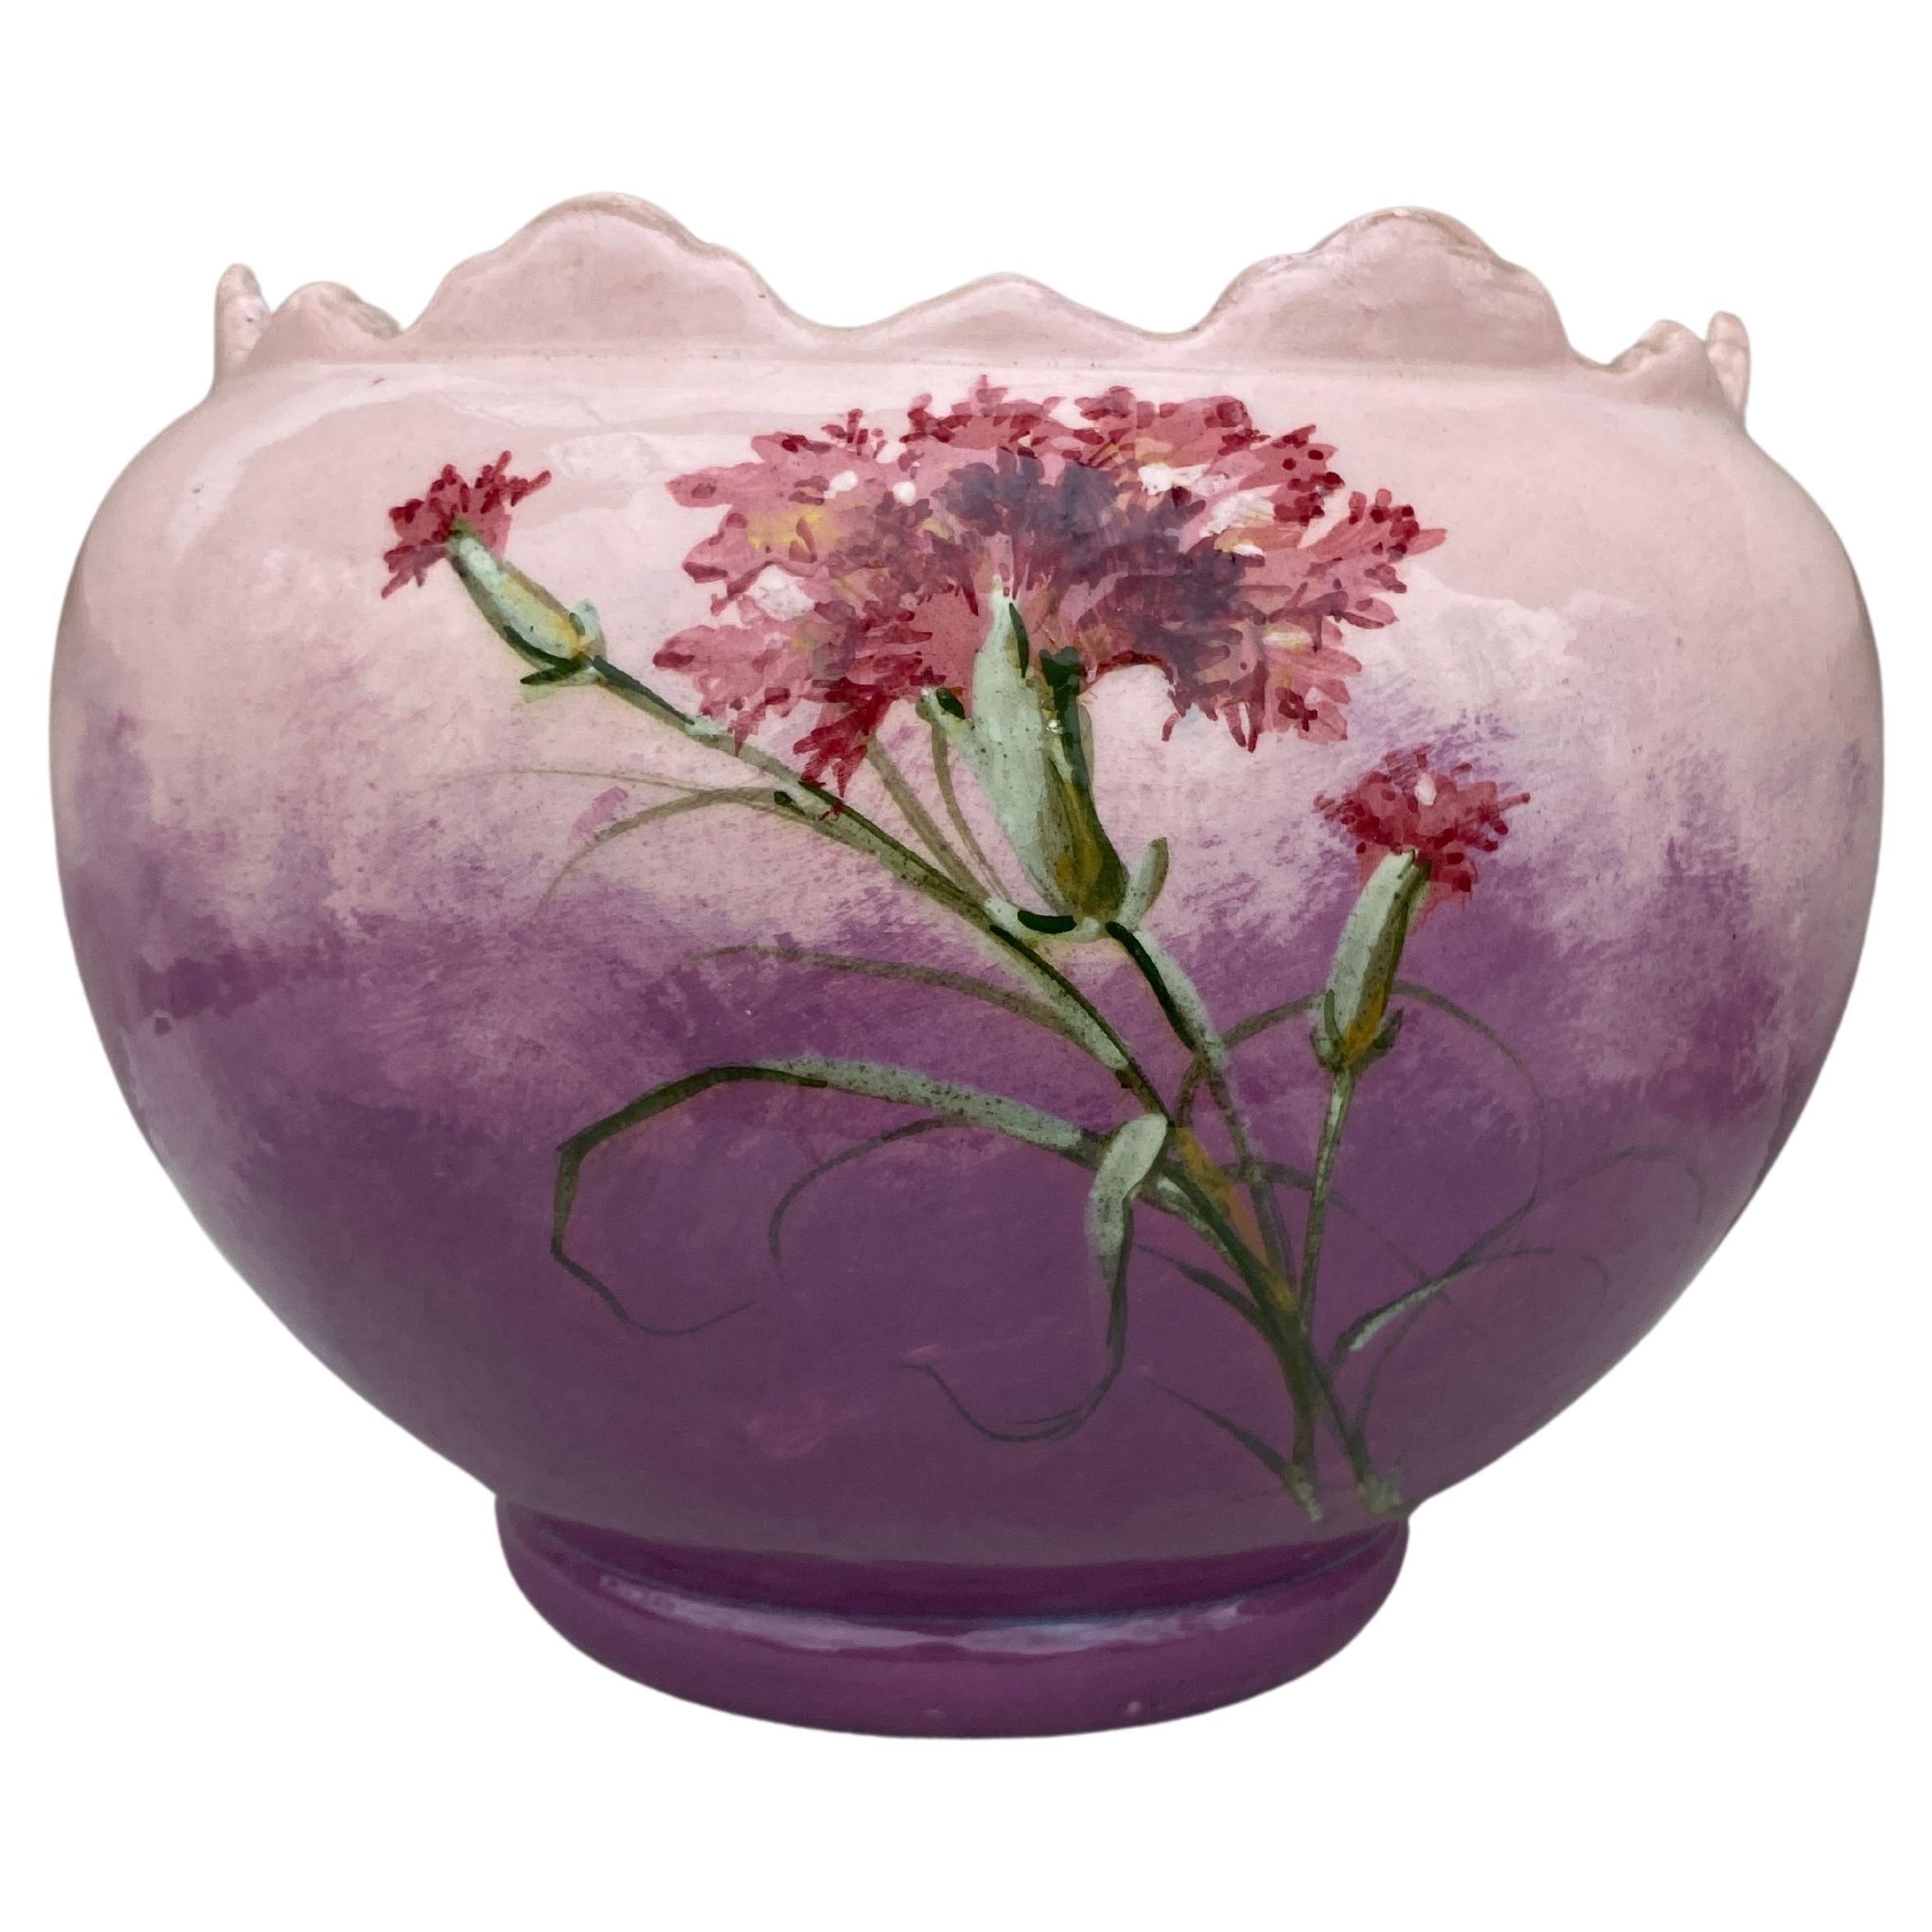 Large French Majolica Carnation Cache Pot Jérôme Massier Fils , Circa 1890
Height / 9.3 inches.
Diameter / 12 inches.